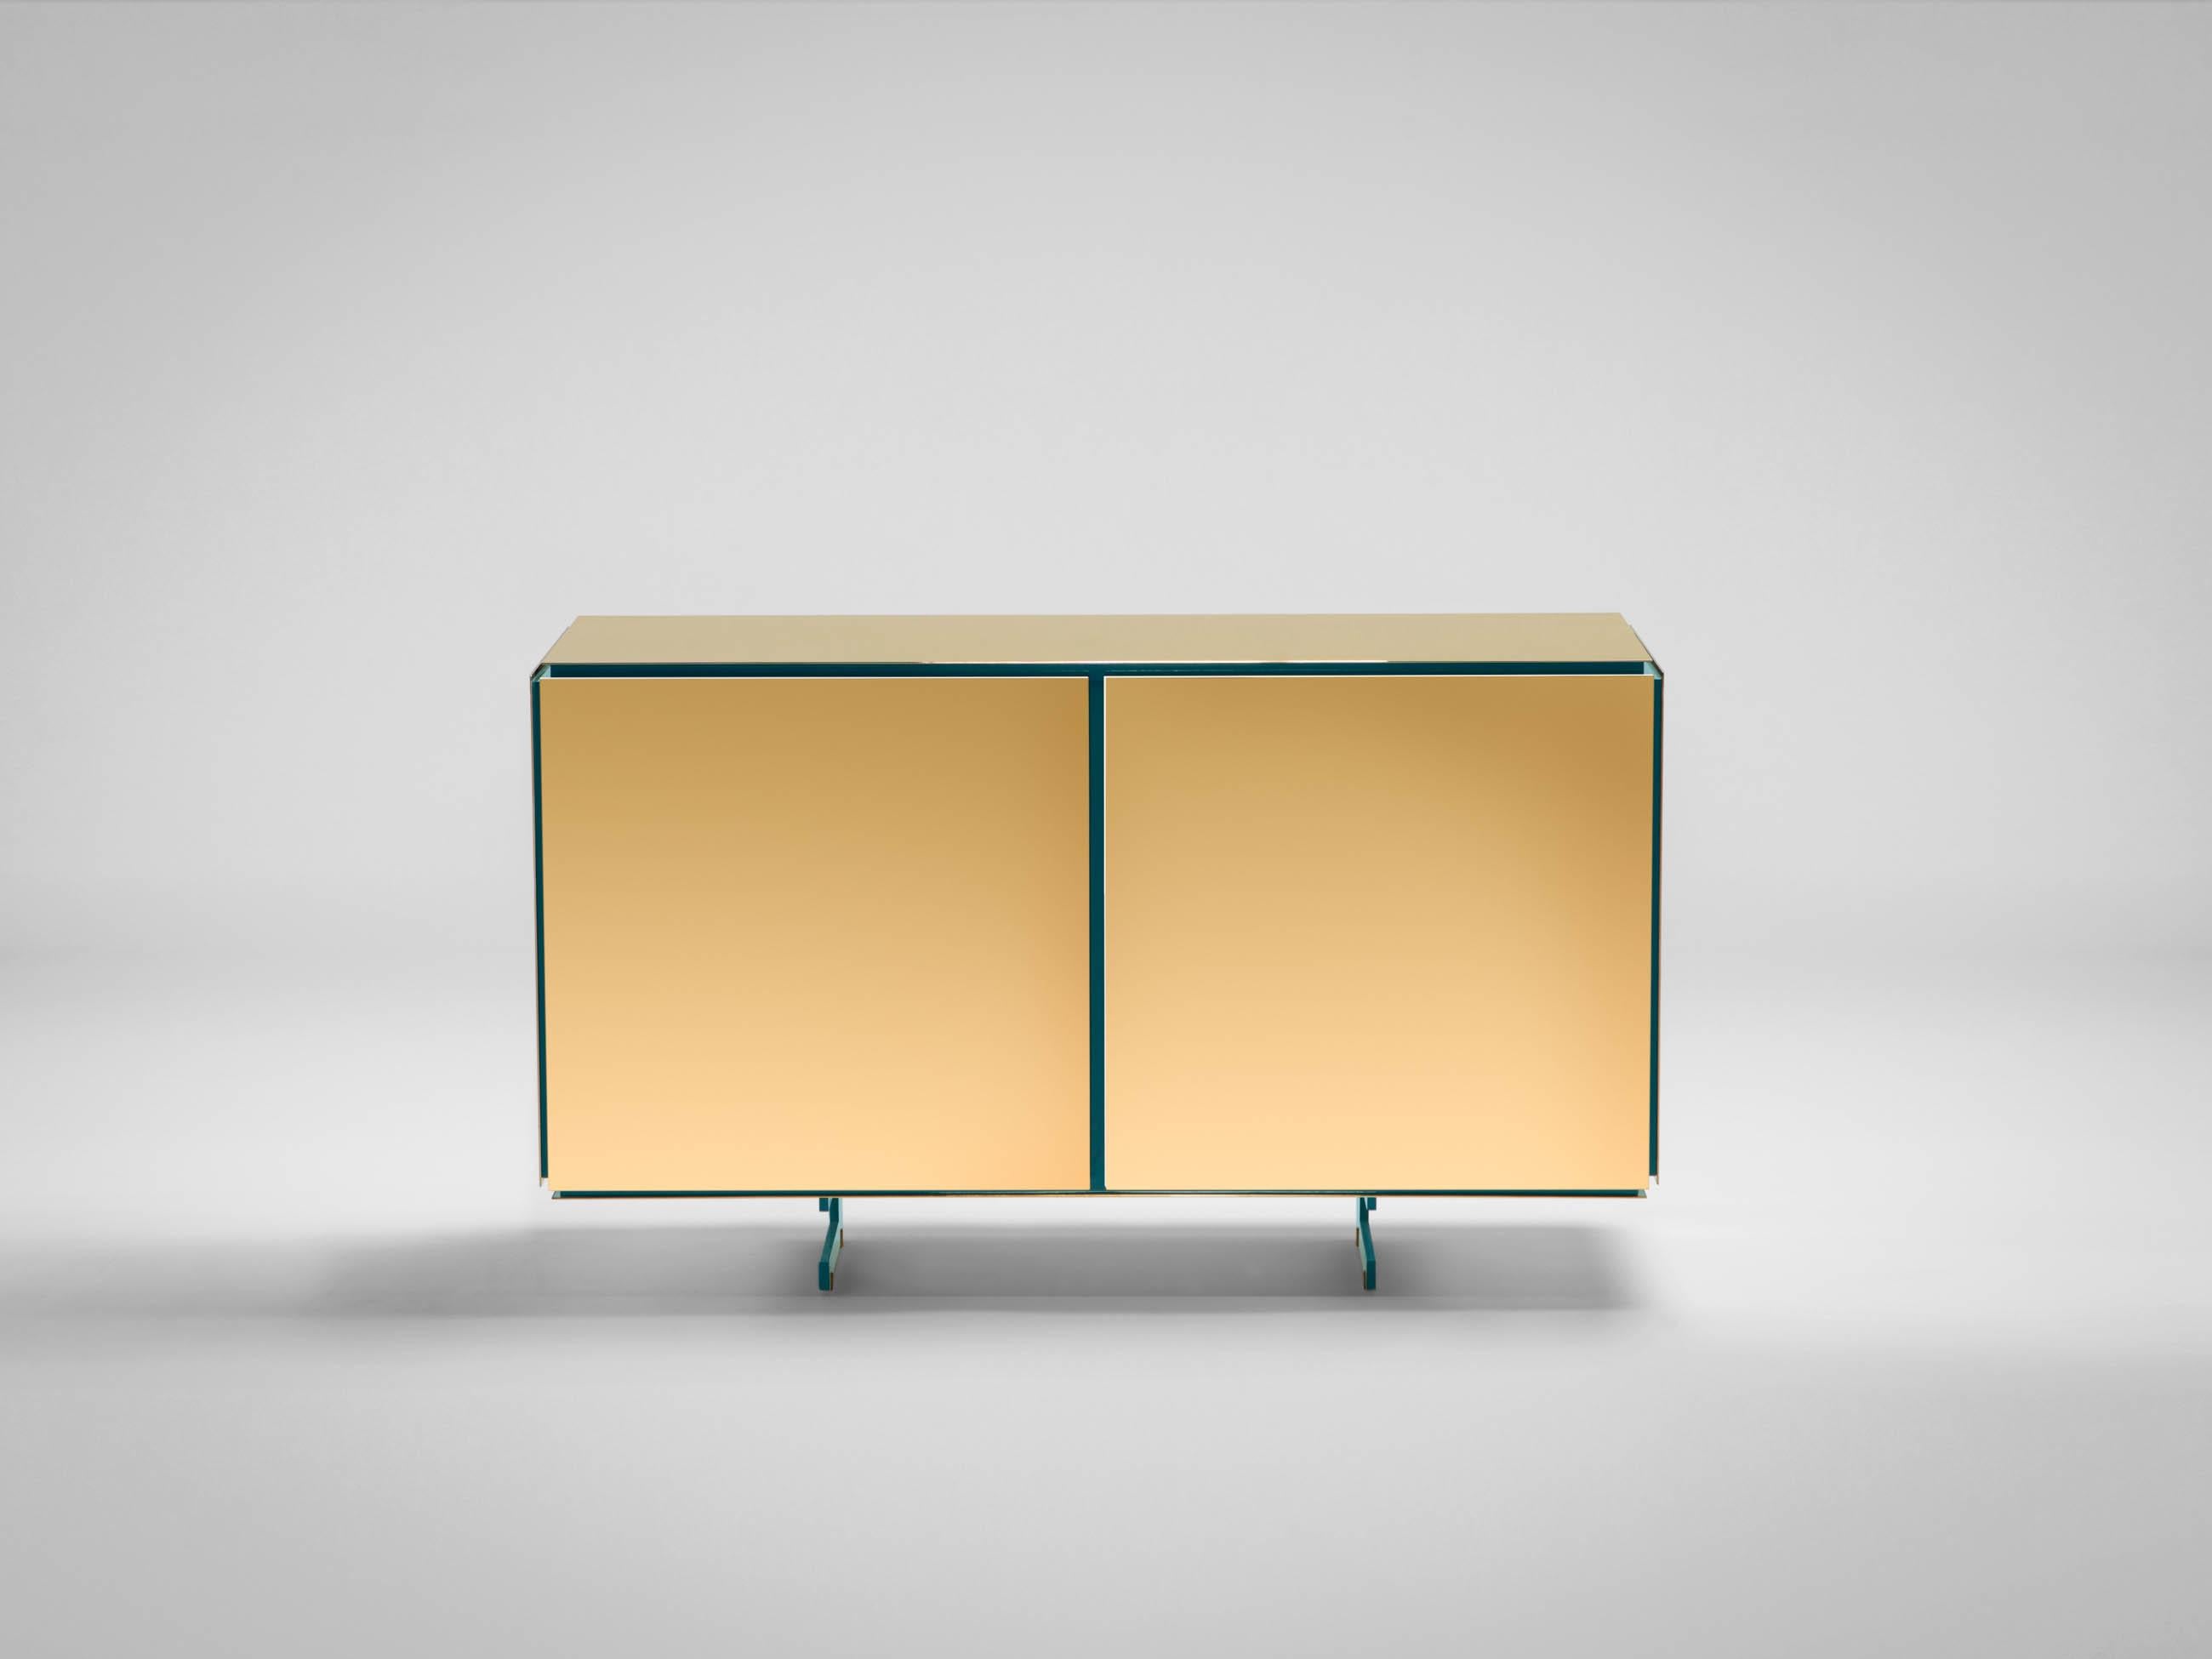 Gold sideboard by SEM.
Dimensions: W 120 x D 42 x H 70 cm.
Materials: polished or fine brushed 24kt yellow gold plated, Inlays in lacquered wood.

SEM is a new brand of home furnishings, designed and produced in Italy. The preview show at Milan